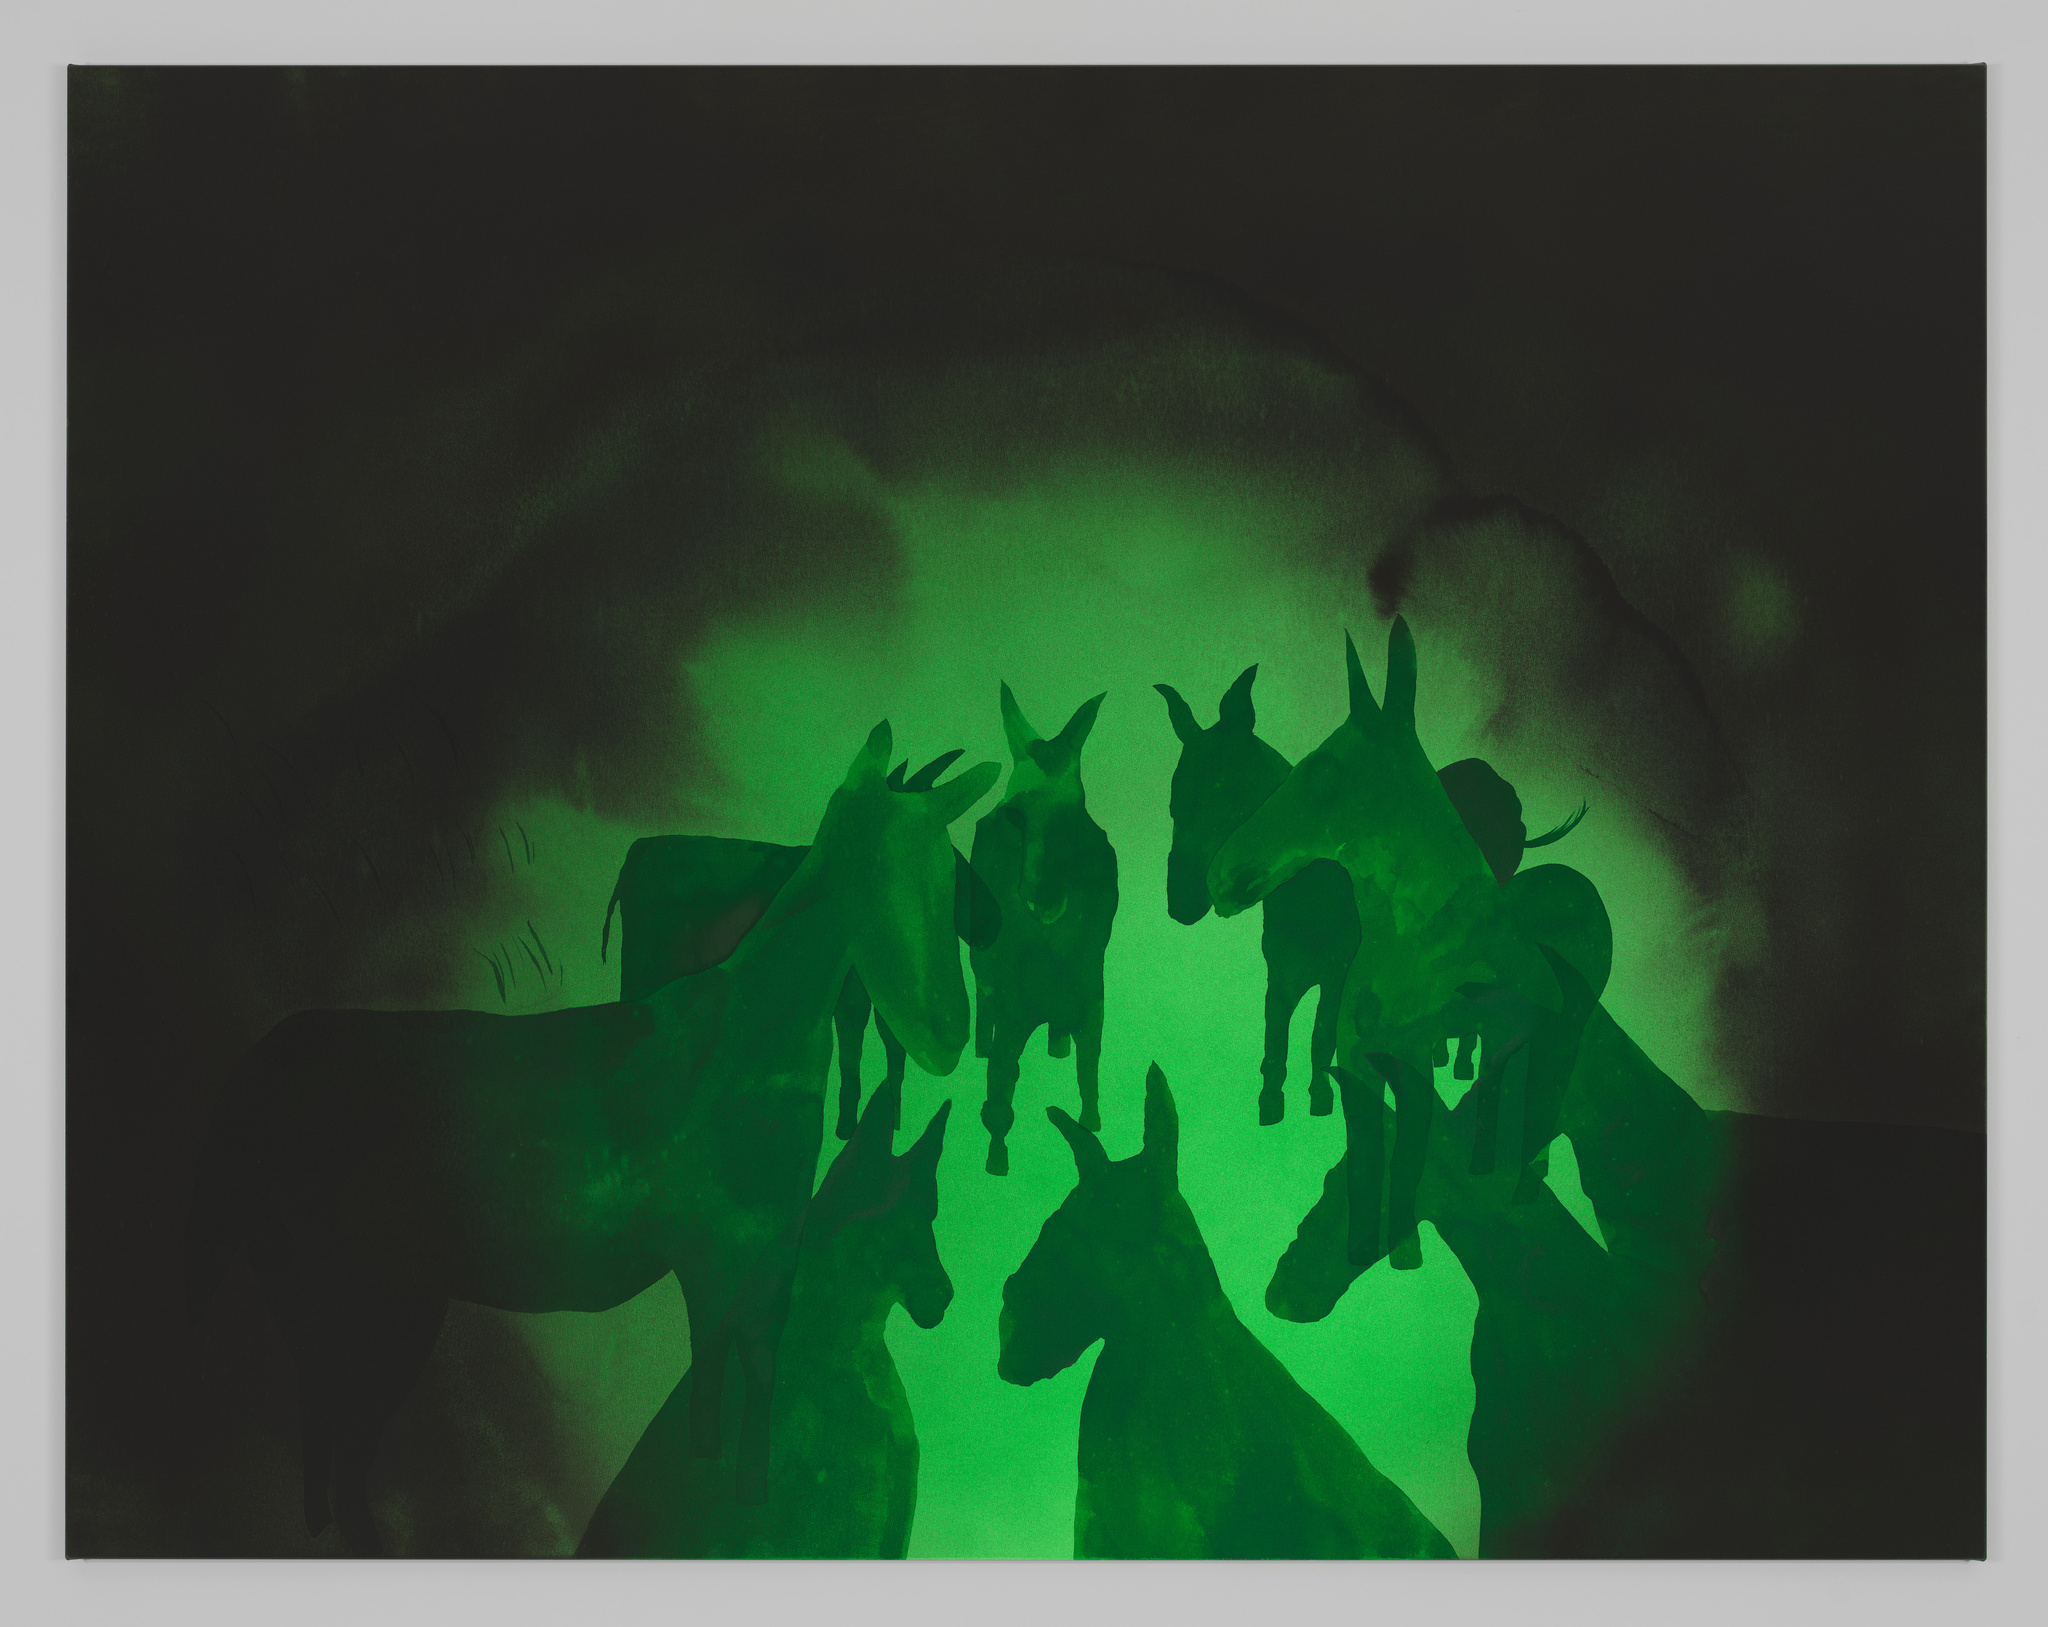 A green monochrome depiction of donkeys' silhouettes congegrated in a circle and framed by a black vingette.